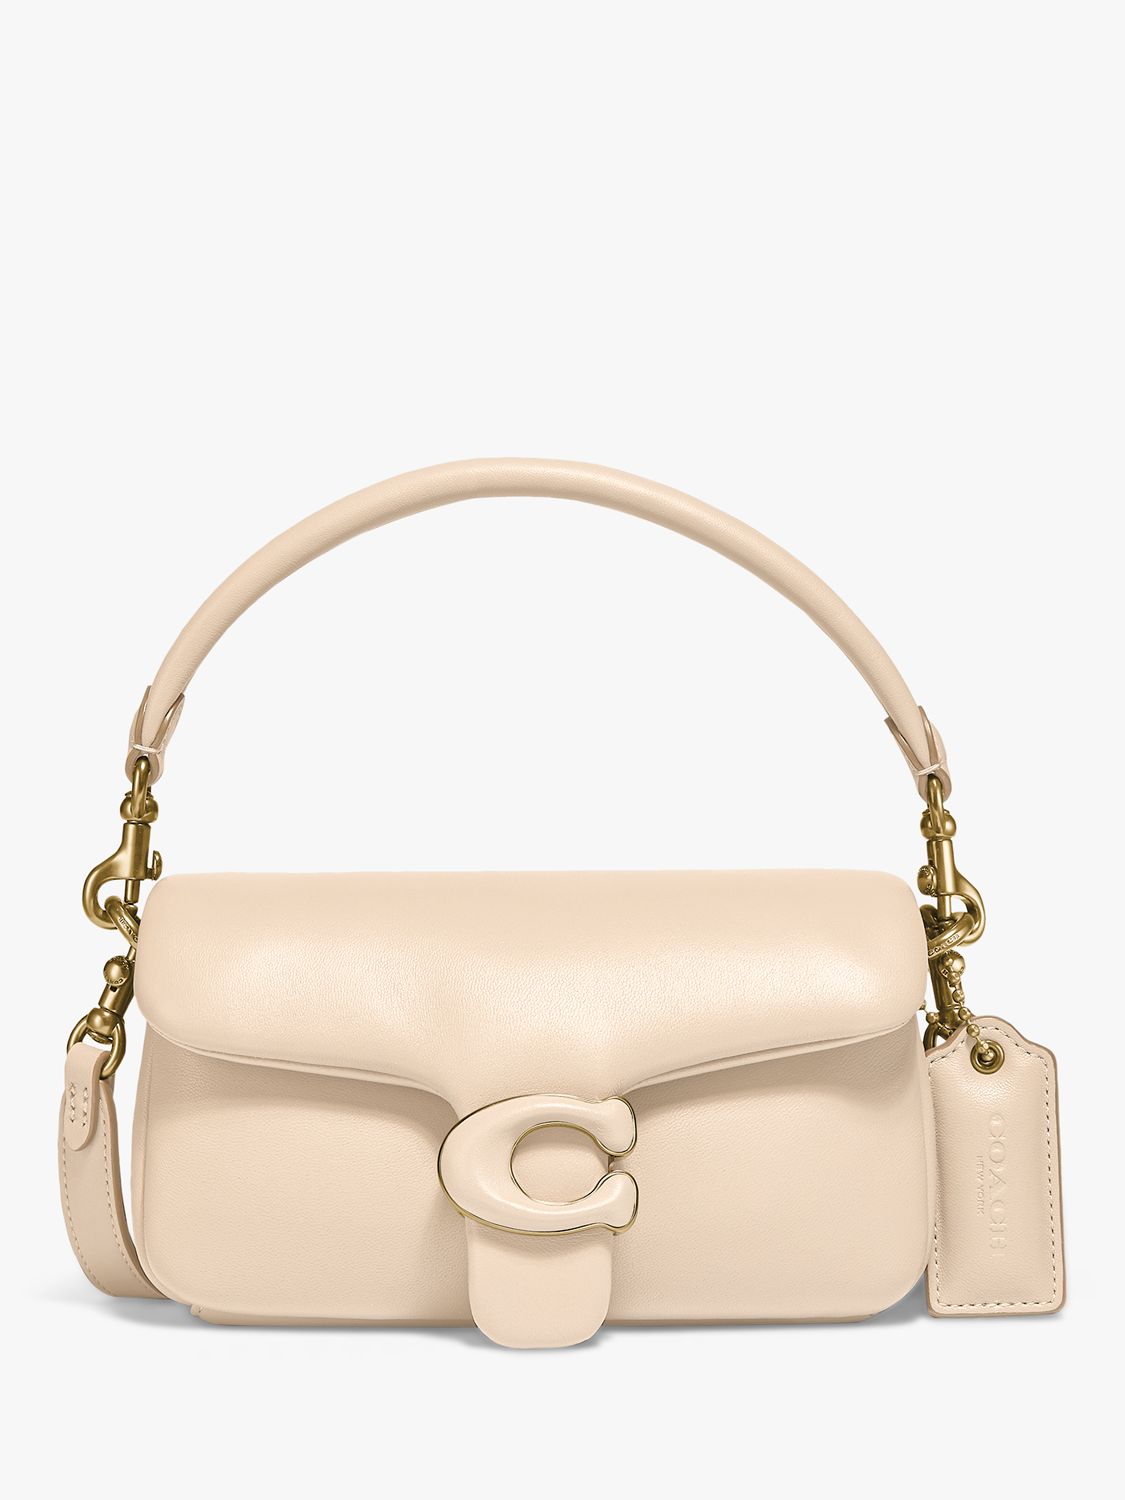 Coach Pillow Tabby 18 Leather Shoulder Bag, Ivory